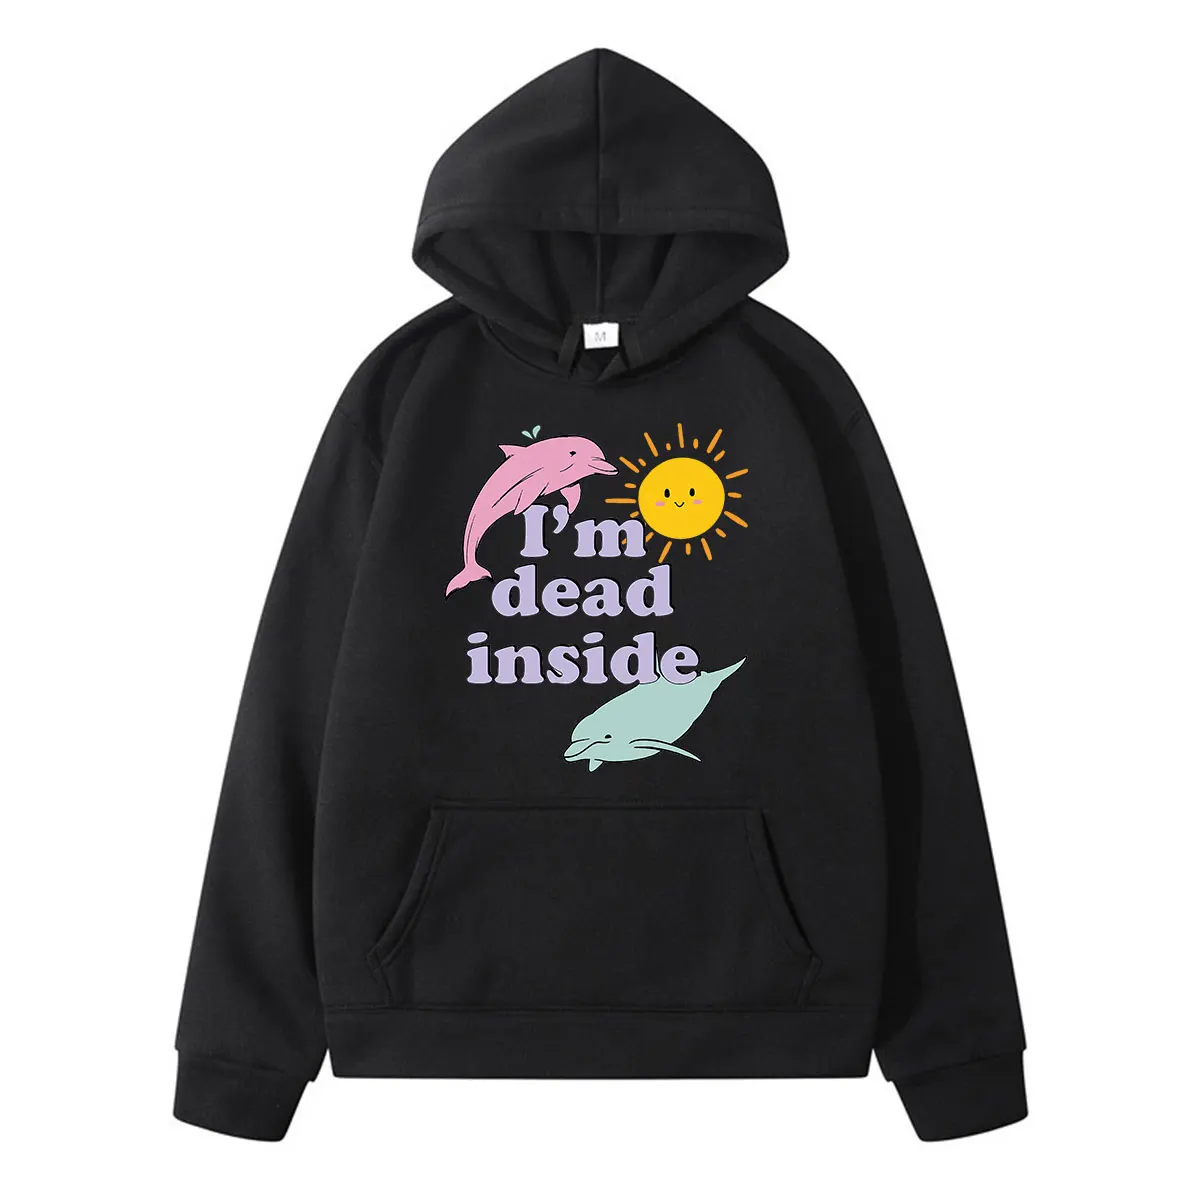 

2022 Couple Trend Hoodies Long-sleeved Top Dolphin IM Dead Inside Sunshine Print Fashion Wear Casual Cotton Unique Classic Wears